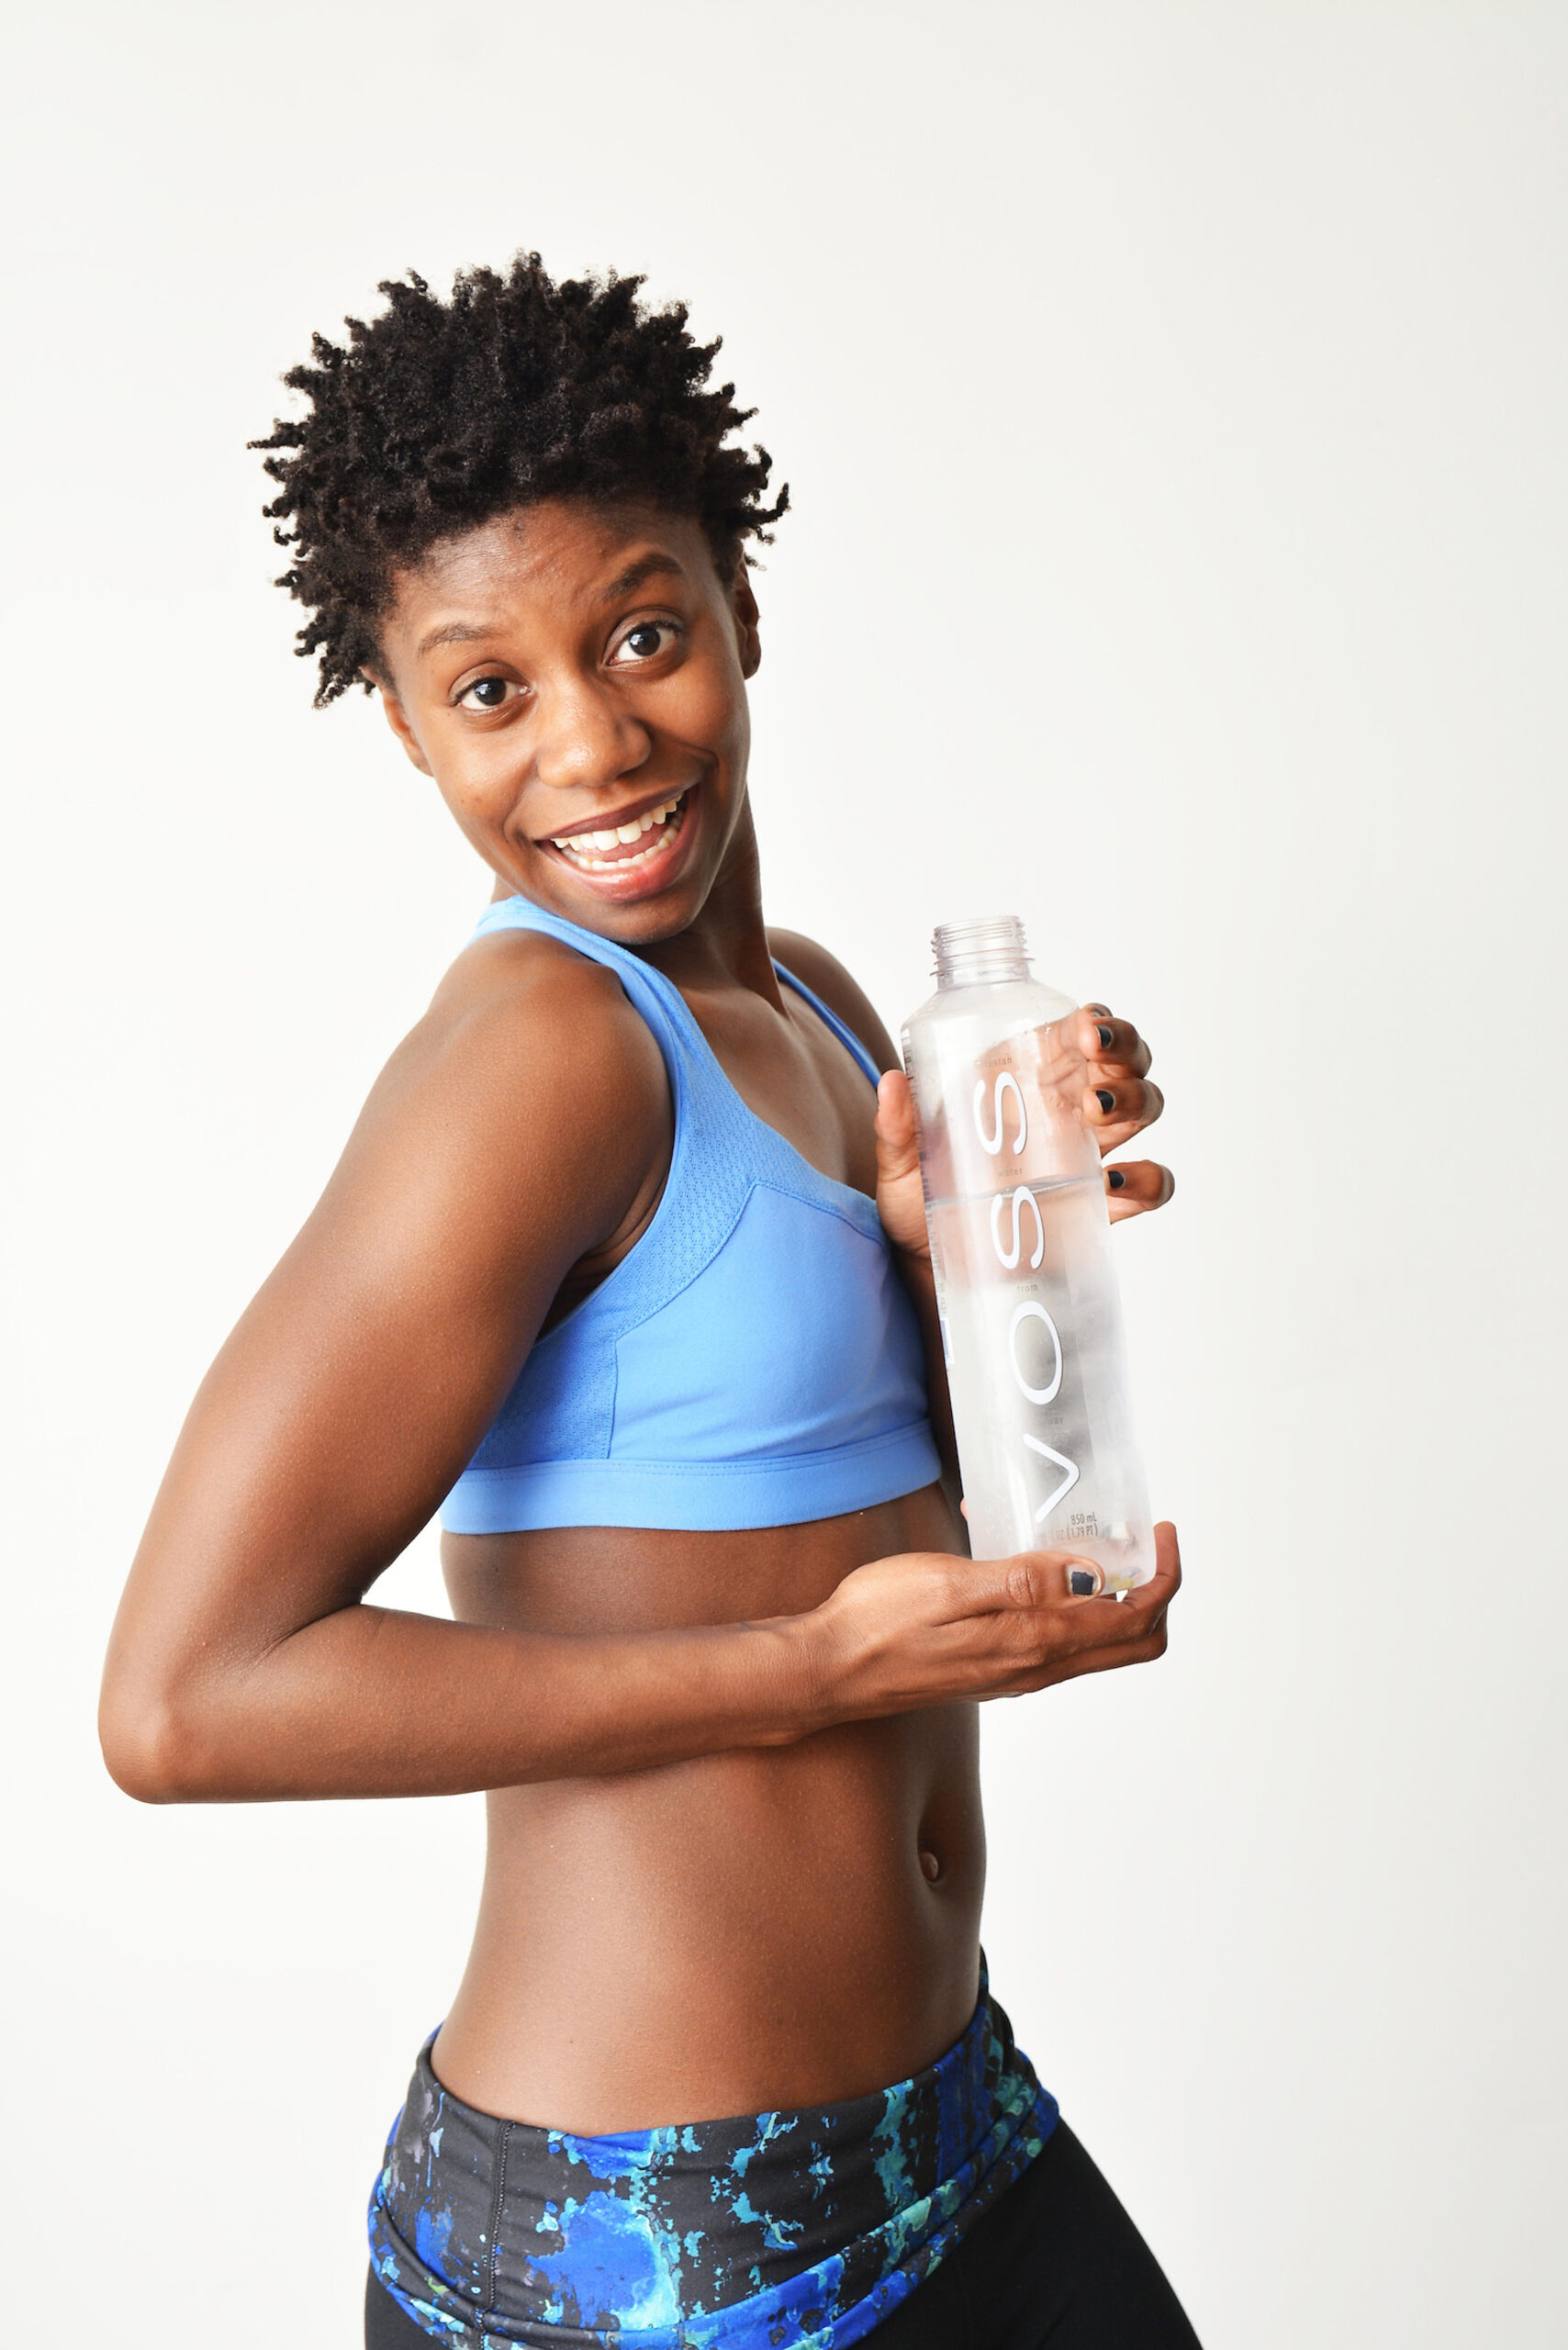 Image of a Black Woman in a workout uniform. Showing one of the techniques for managing depression. It is one thing that might be suggested in depression counseling from an Atlanta depression therapist.